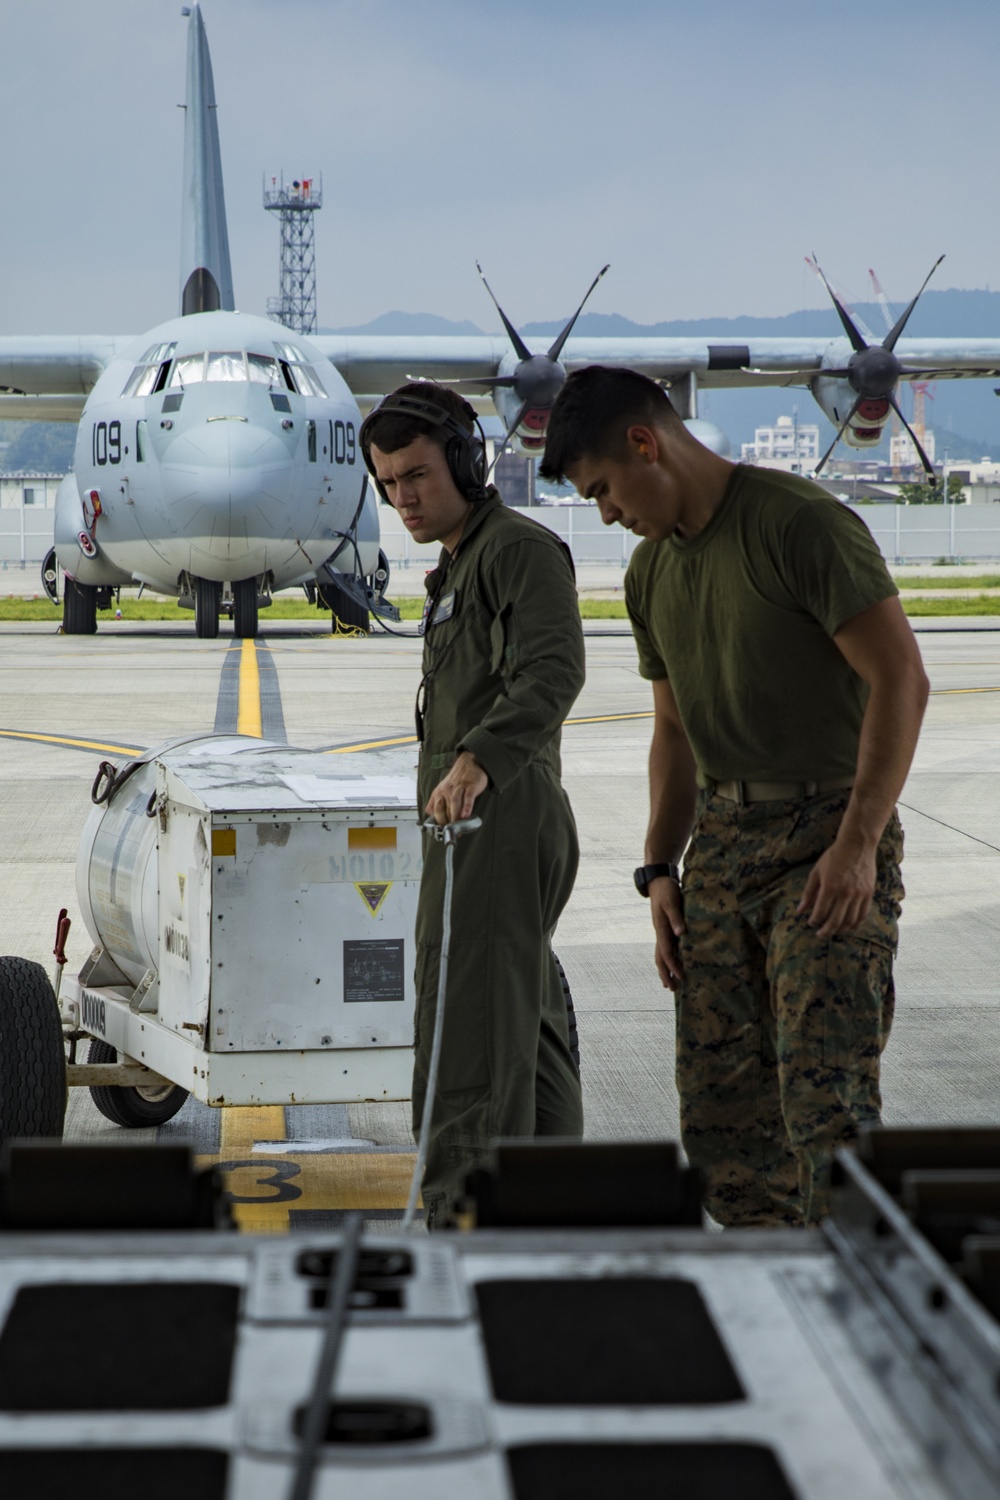 VMGR-152 arrives at Whidbey Island for unit-level training